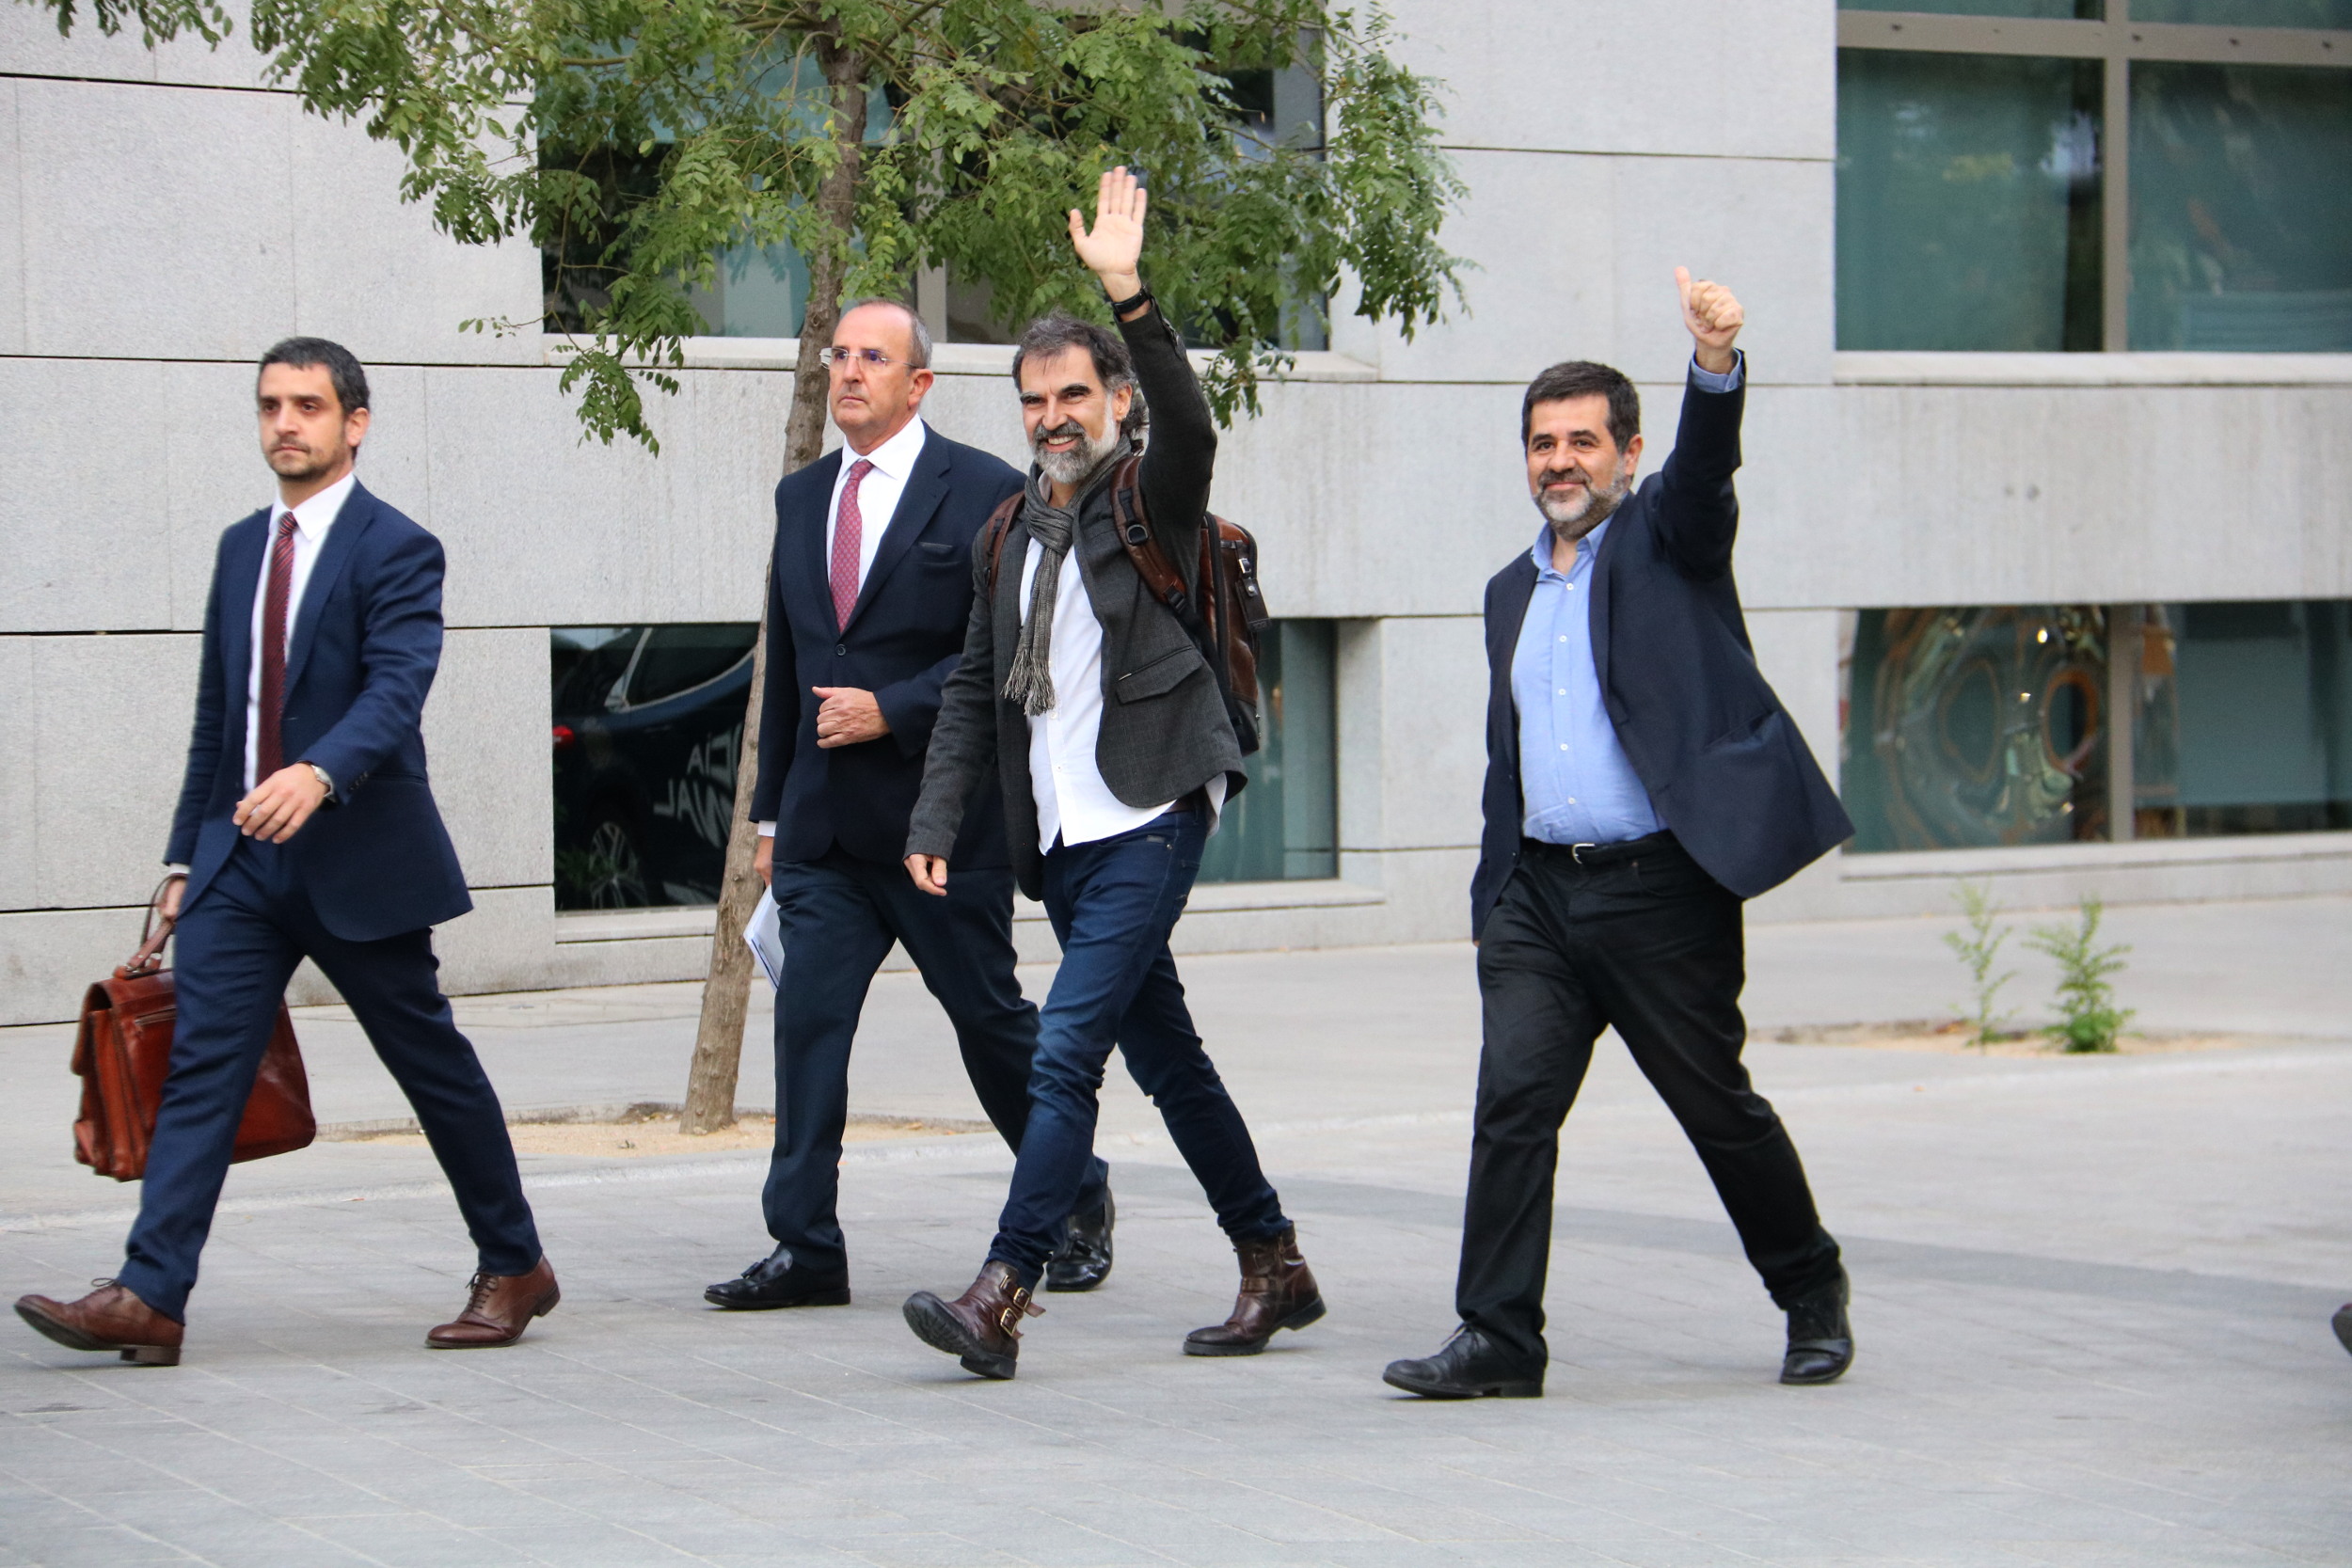 Catalan National Assembly president, Jordi Sánchez (right), and Òmnium Cultural president, Jordi Cuixart arrive in the Spanish National Court on Monday (by Roger Pi de Cabanyes)